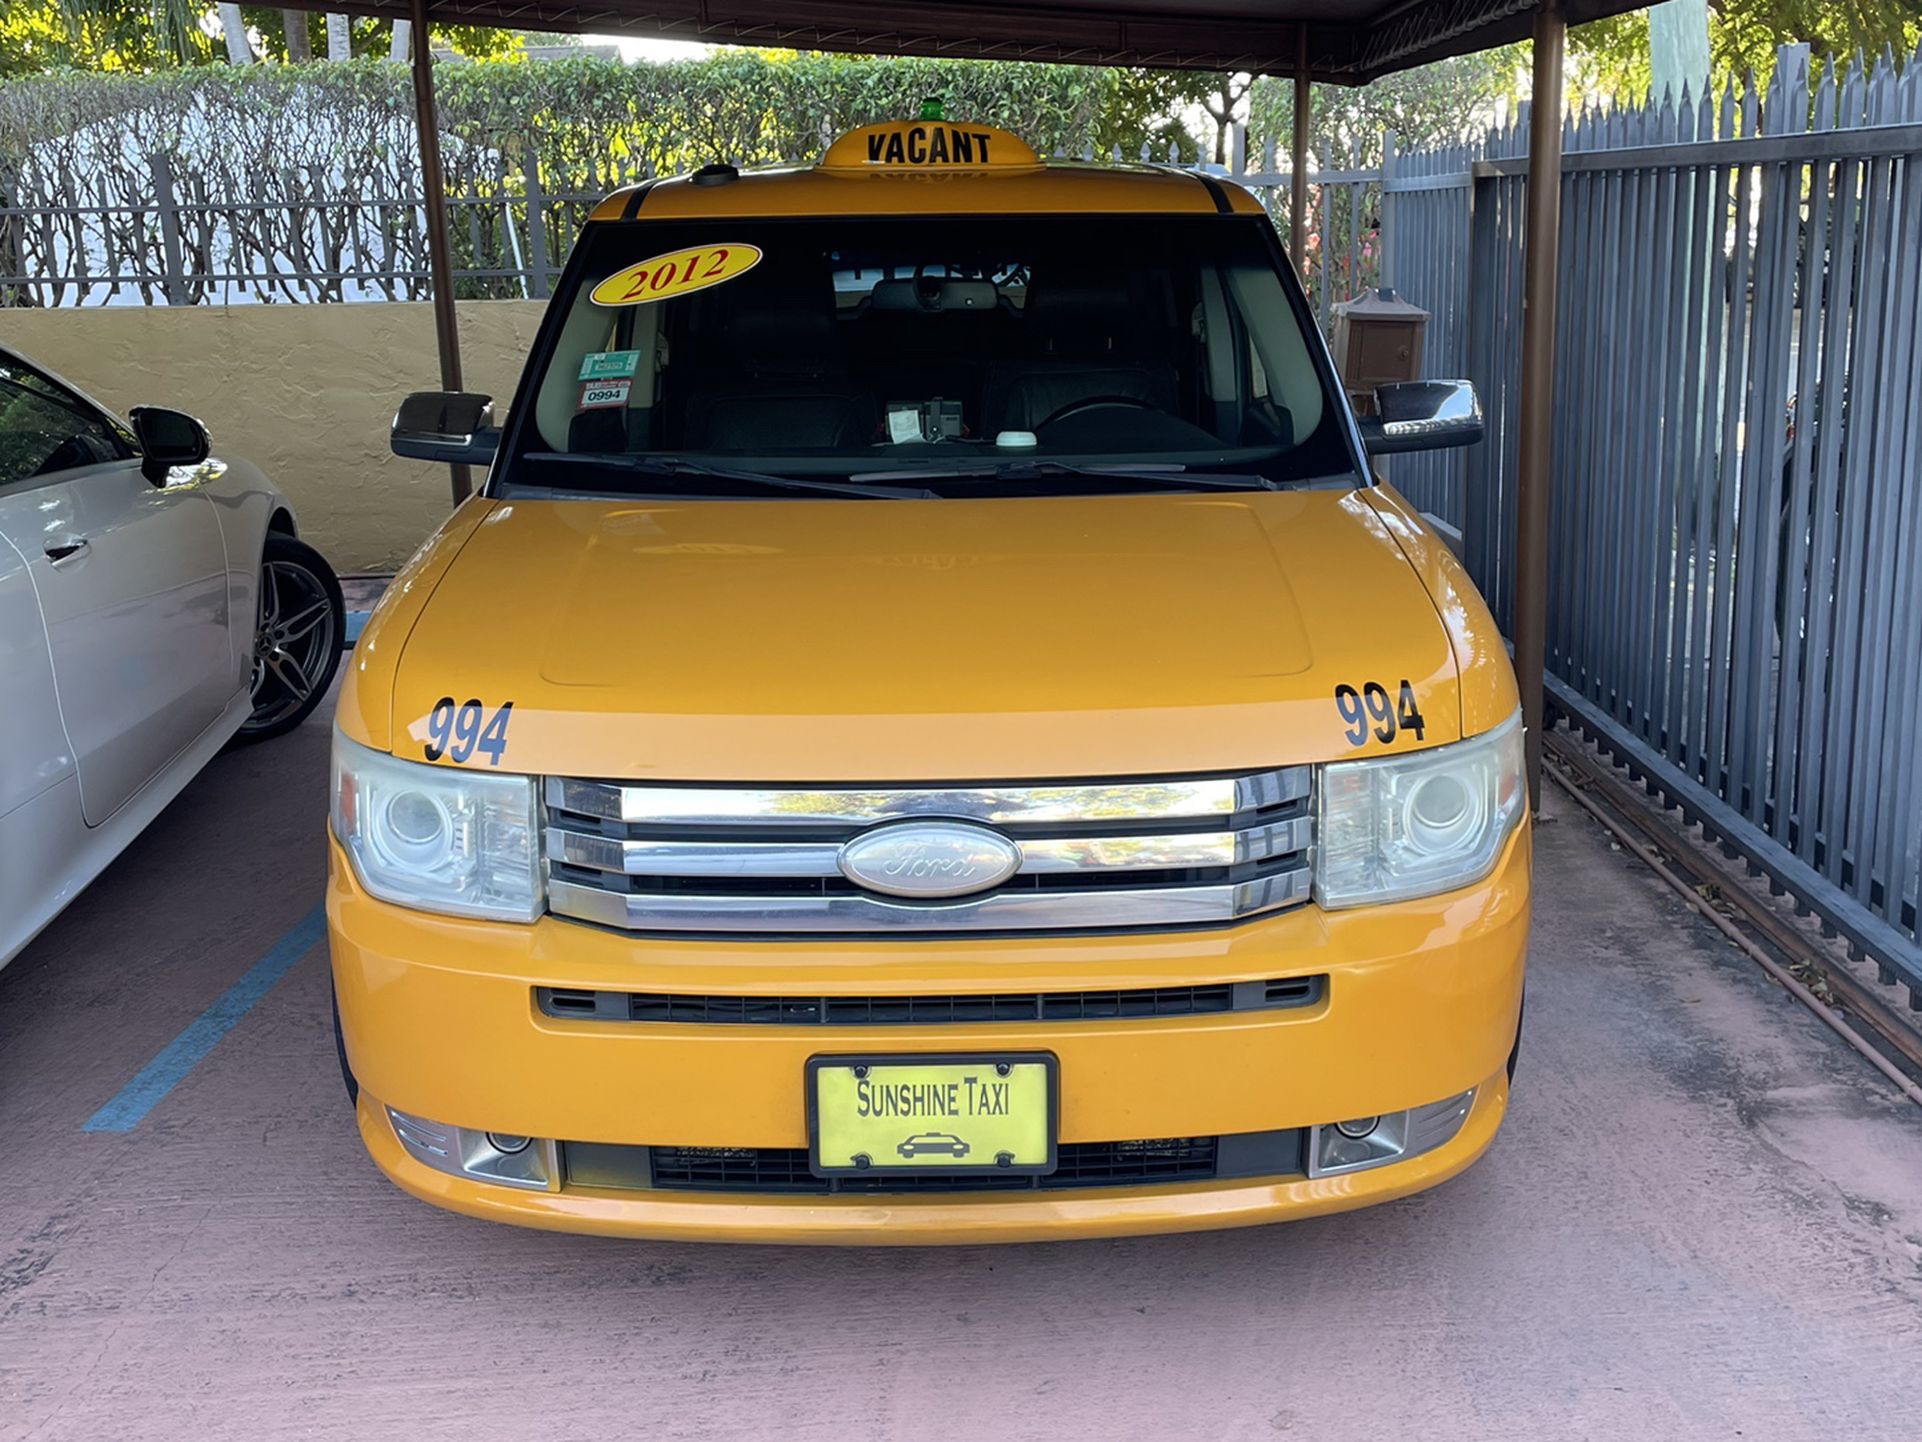 Miami Dade County Taxi Medallion includes a 2011 Ford Crown Victoria Ready to work.